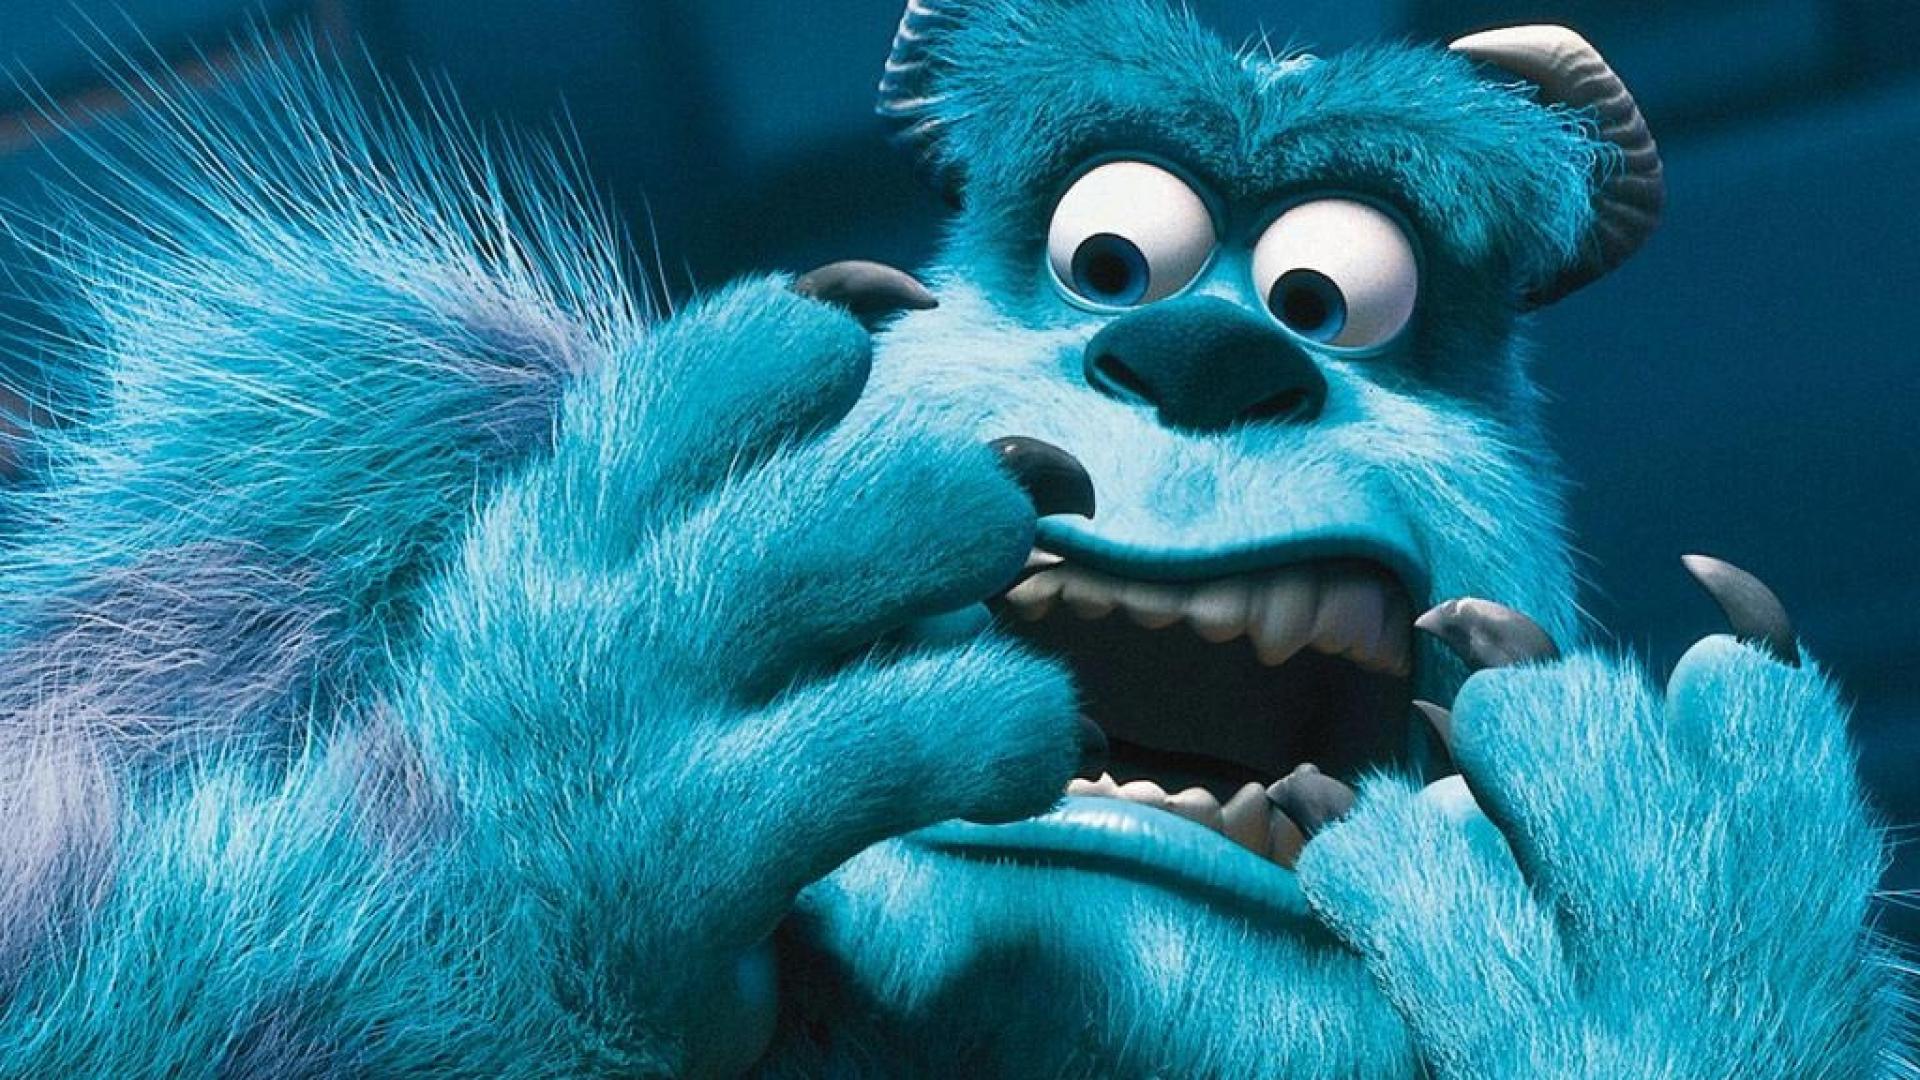 Monsters animation movies hd wallpaper | Latest HD Wallpapers